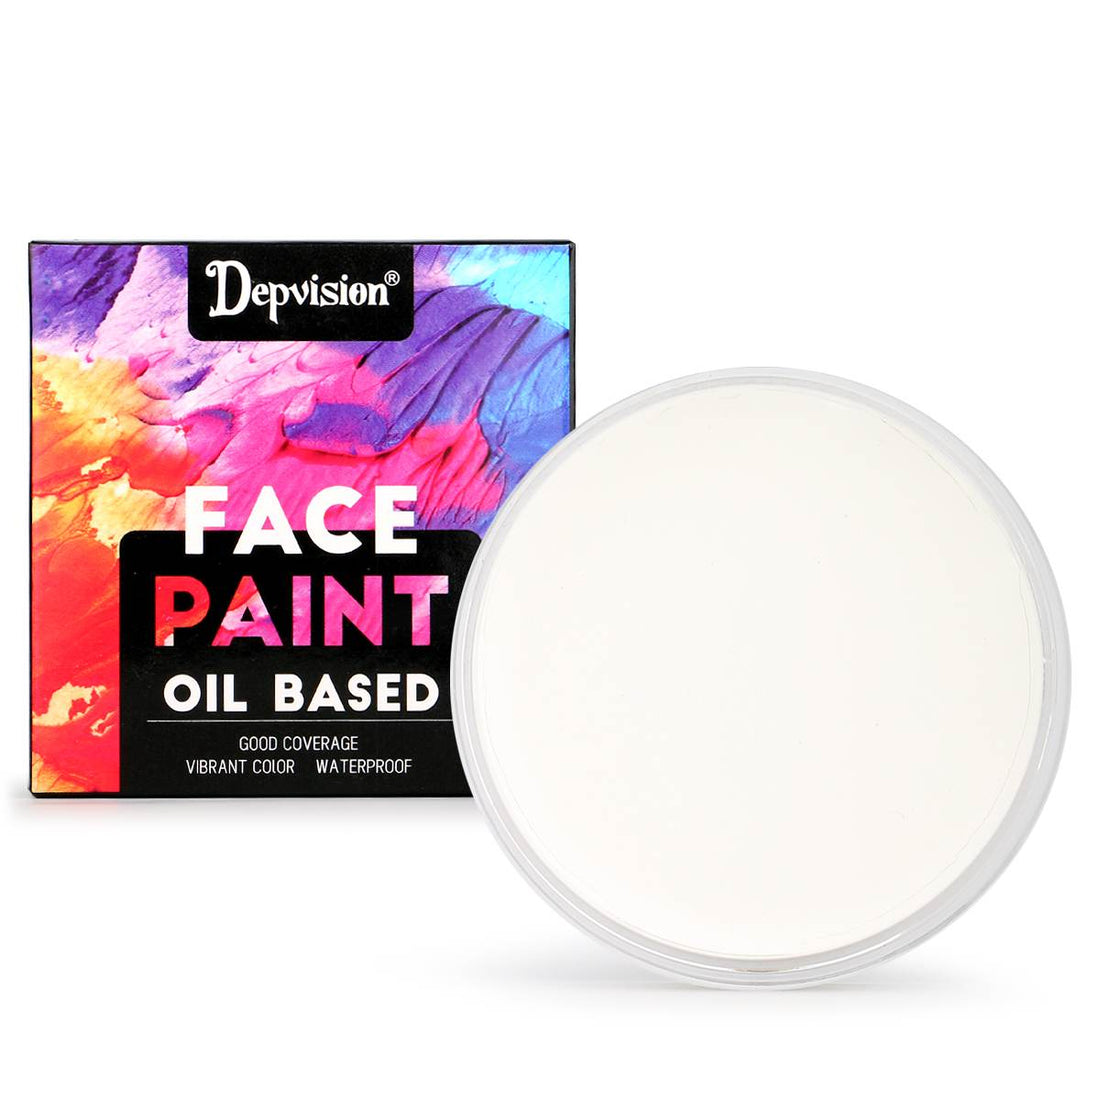 Waterproof Oil Based Face Paint - White